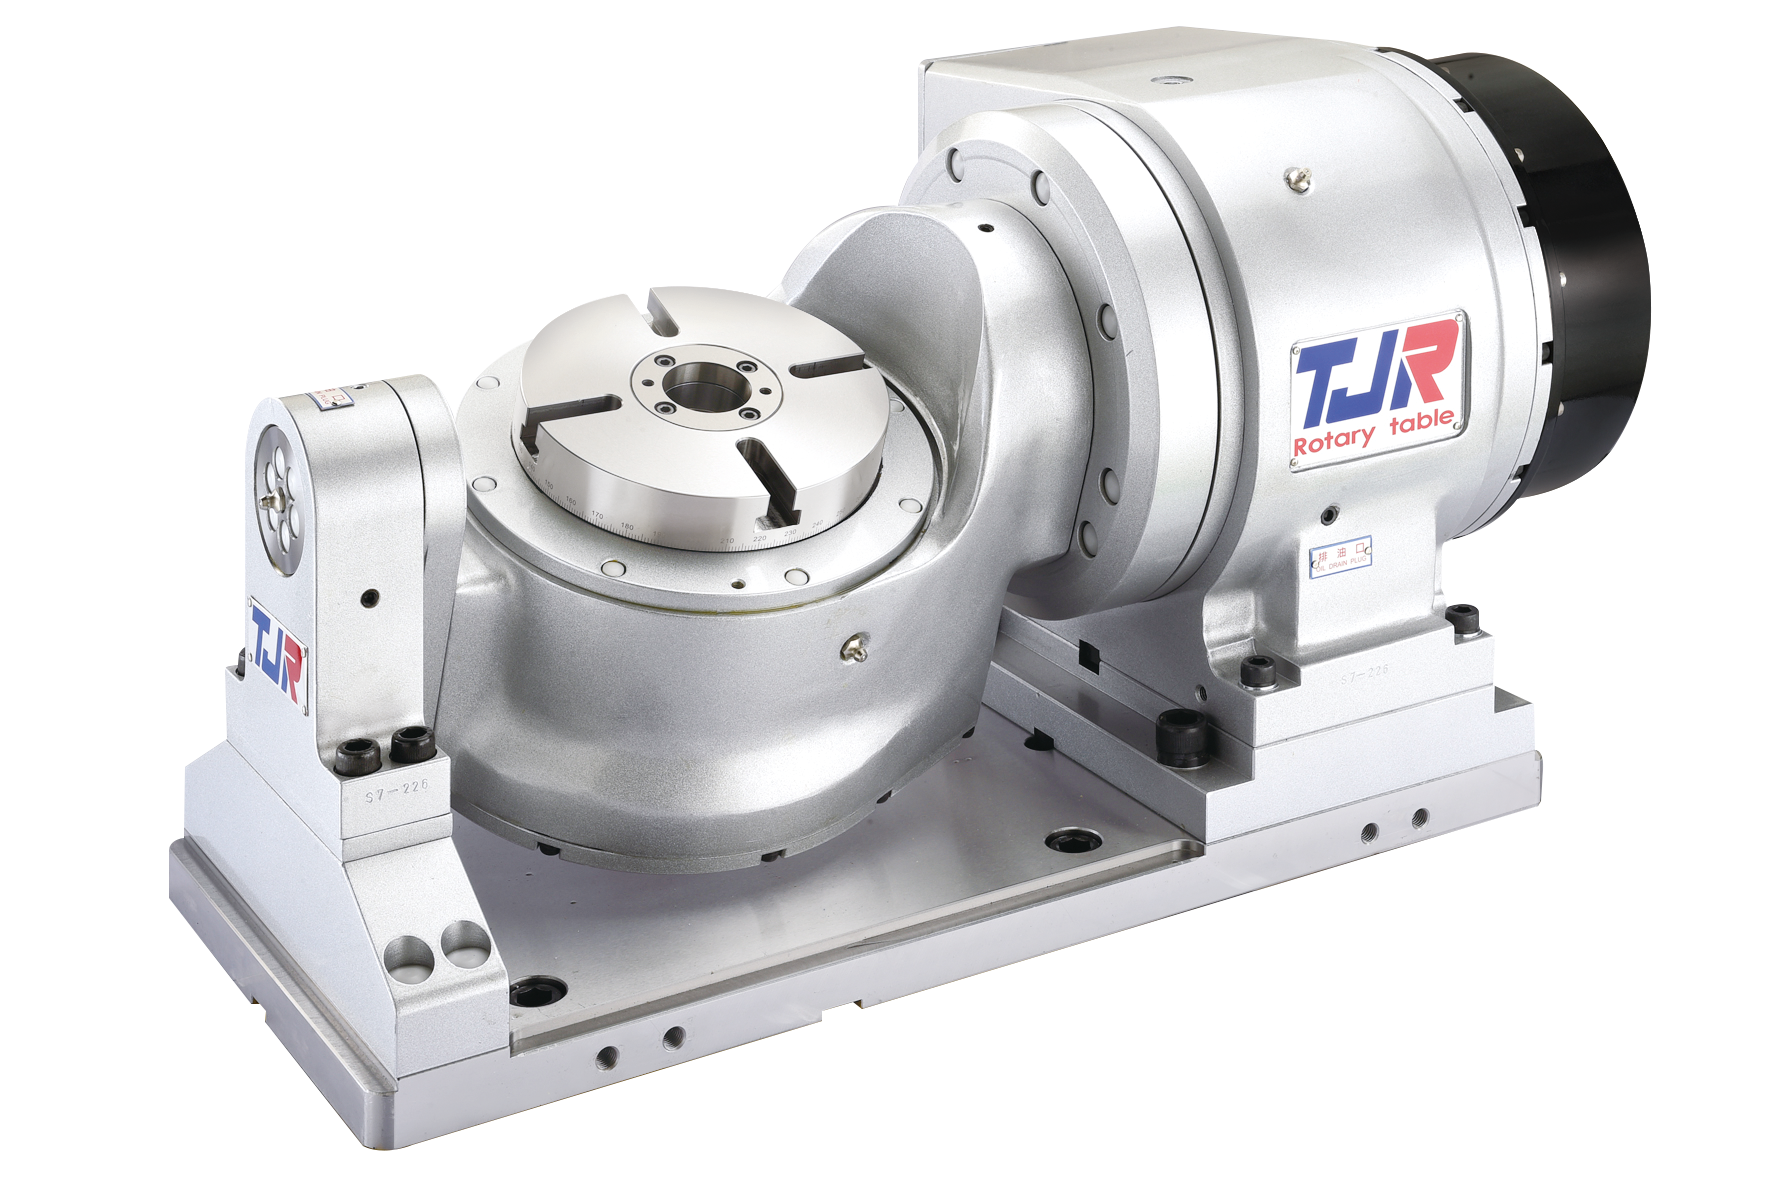 Products|The 4th & 5th Axis Direct Drive Motor Series - The 4th Axis Direct Drive Motor Series (Pneumatic Brake)